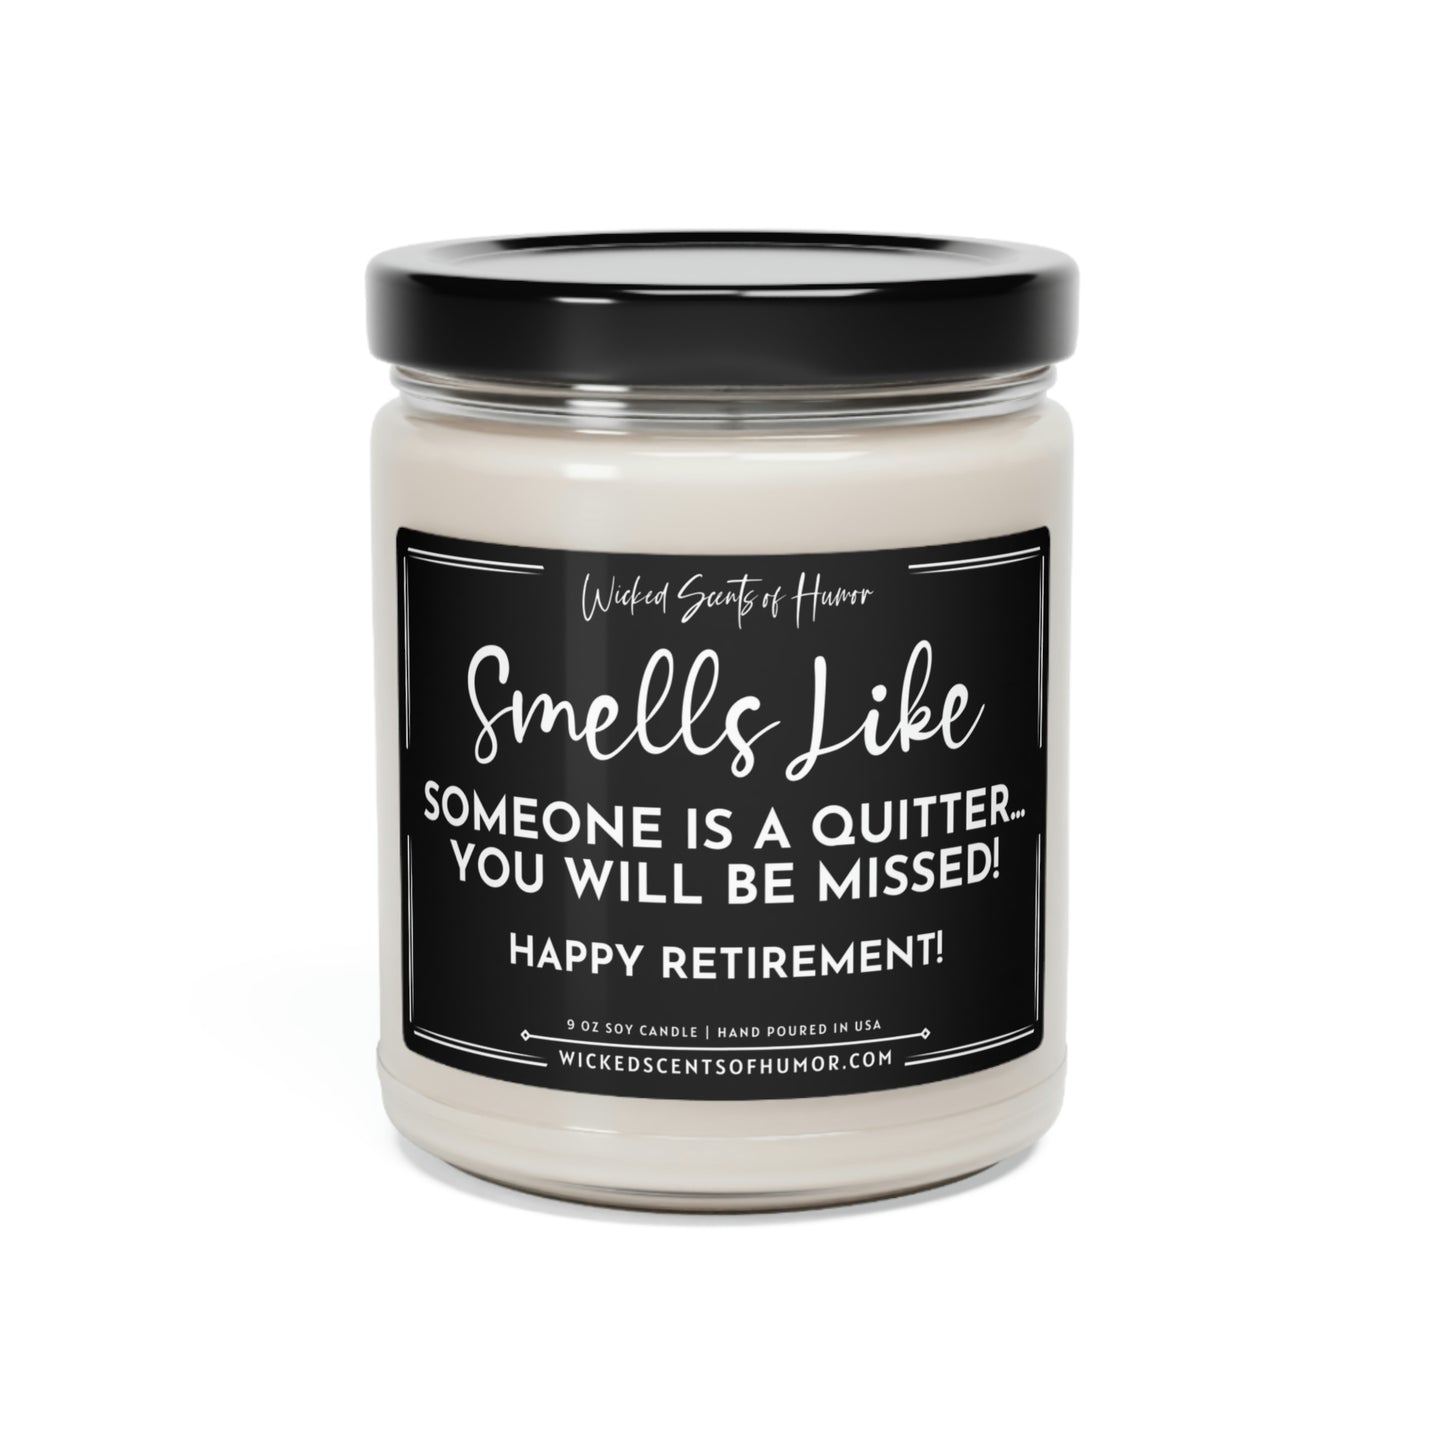 Happy Retirement, Smells Like Someone Is A Quitter, No More Mondays, Funny Candle Gift, Eco-Friendly All Natural Soy Candle,